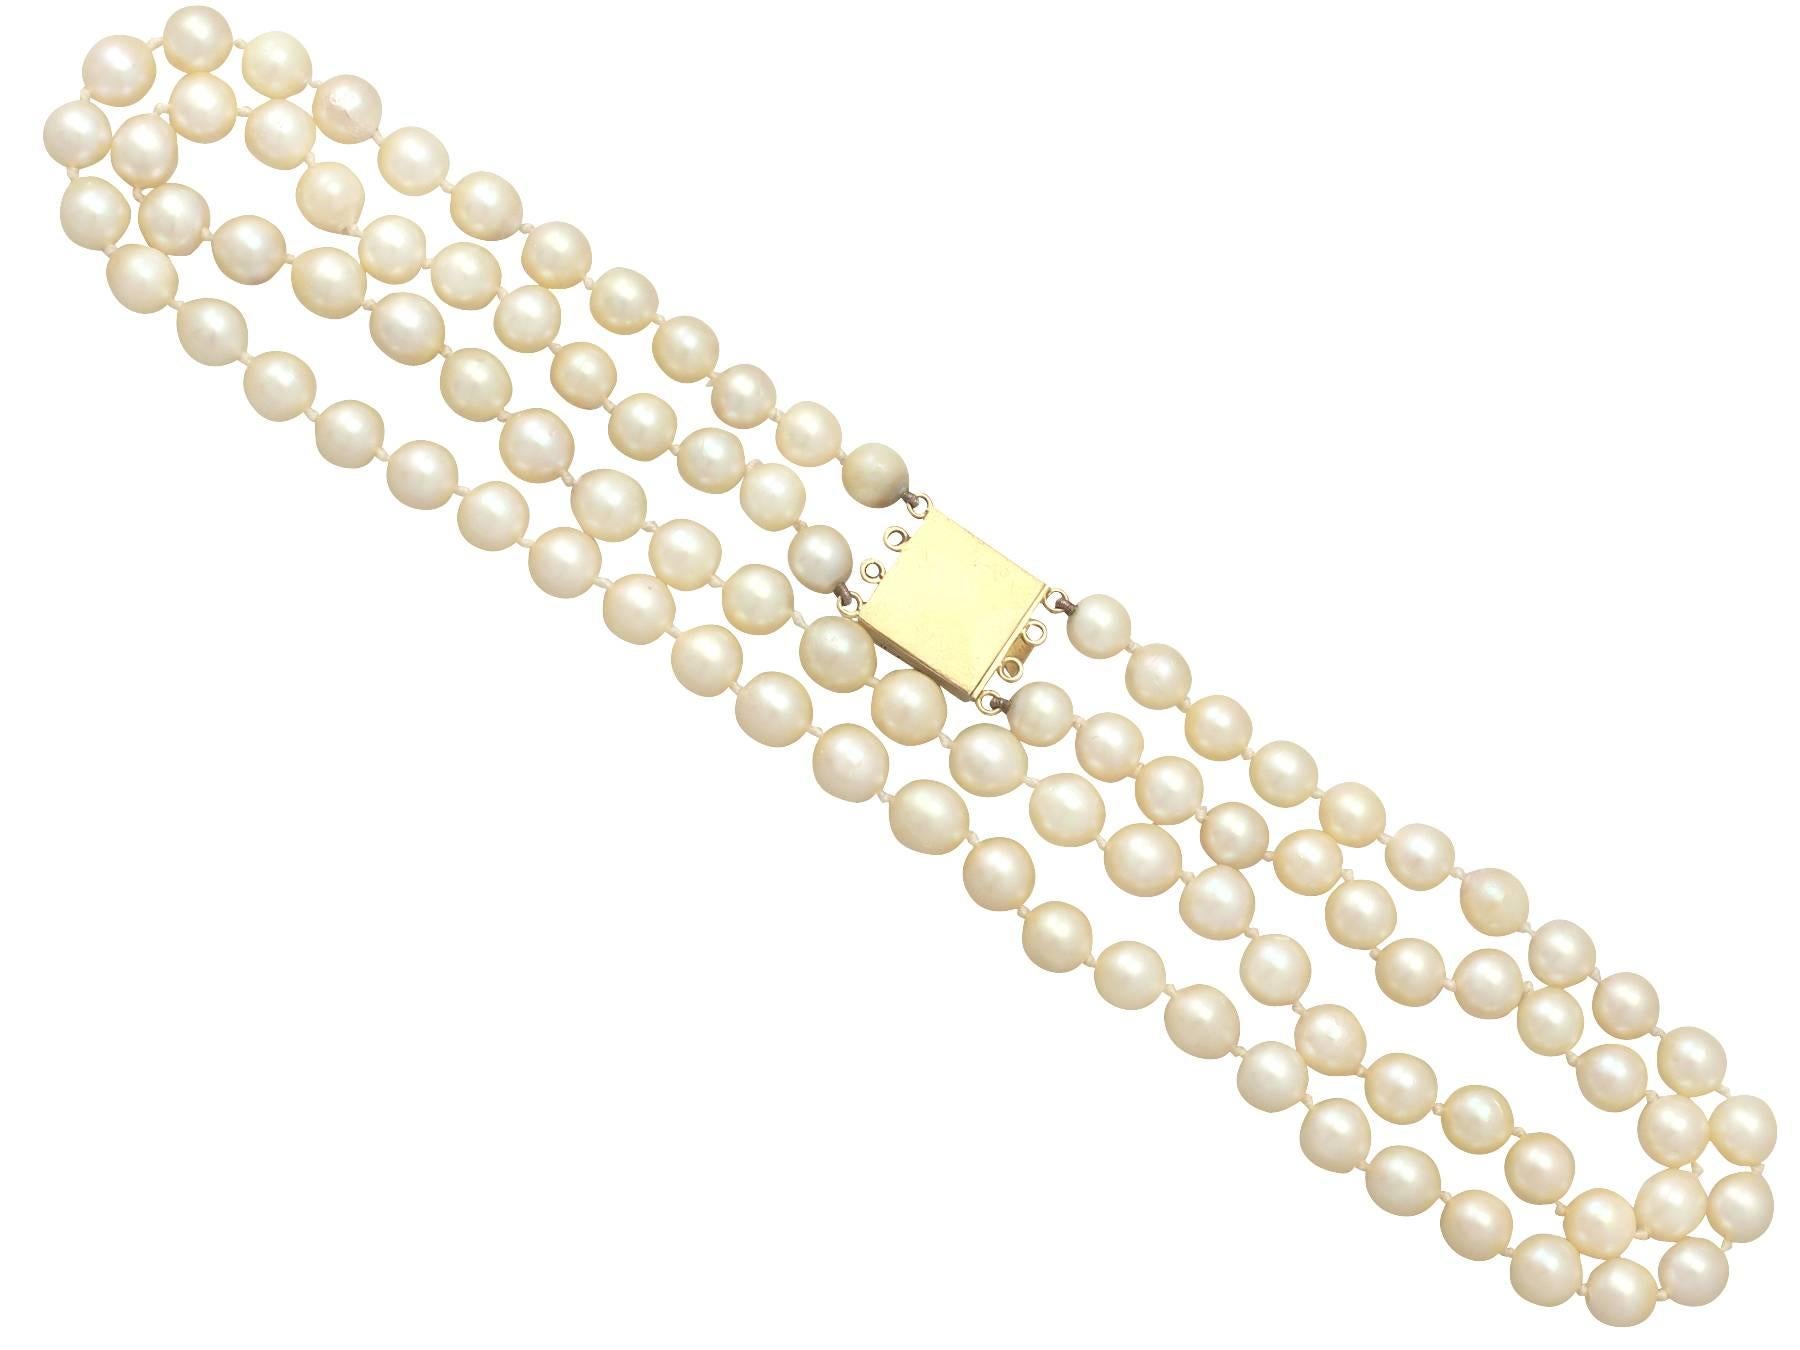 Double Strand Pearl Necklace with 18k Yellow Gold Locket Clasp - Vintage 1